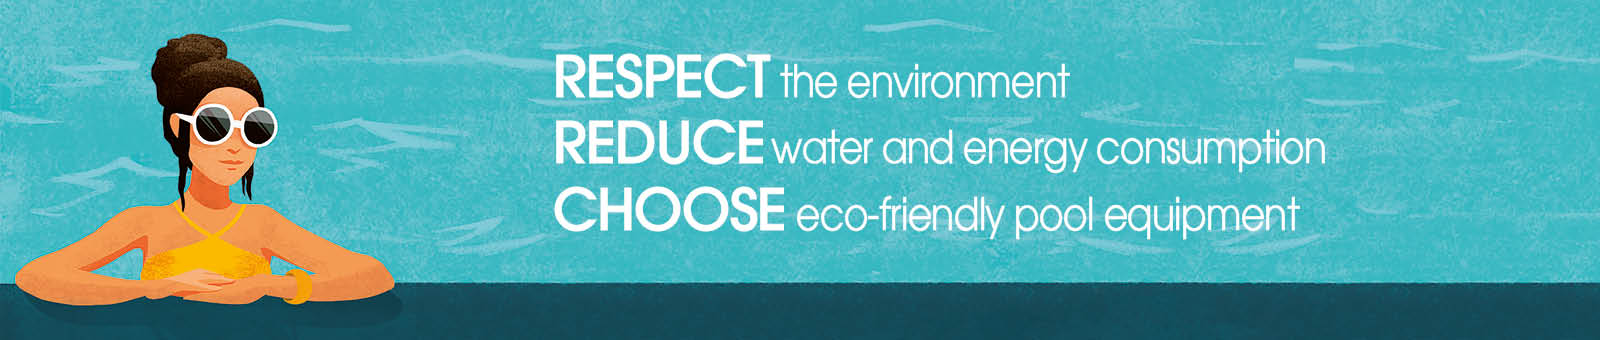 Our eco-friendly solutions